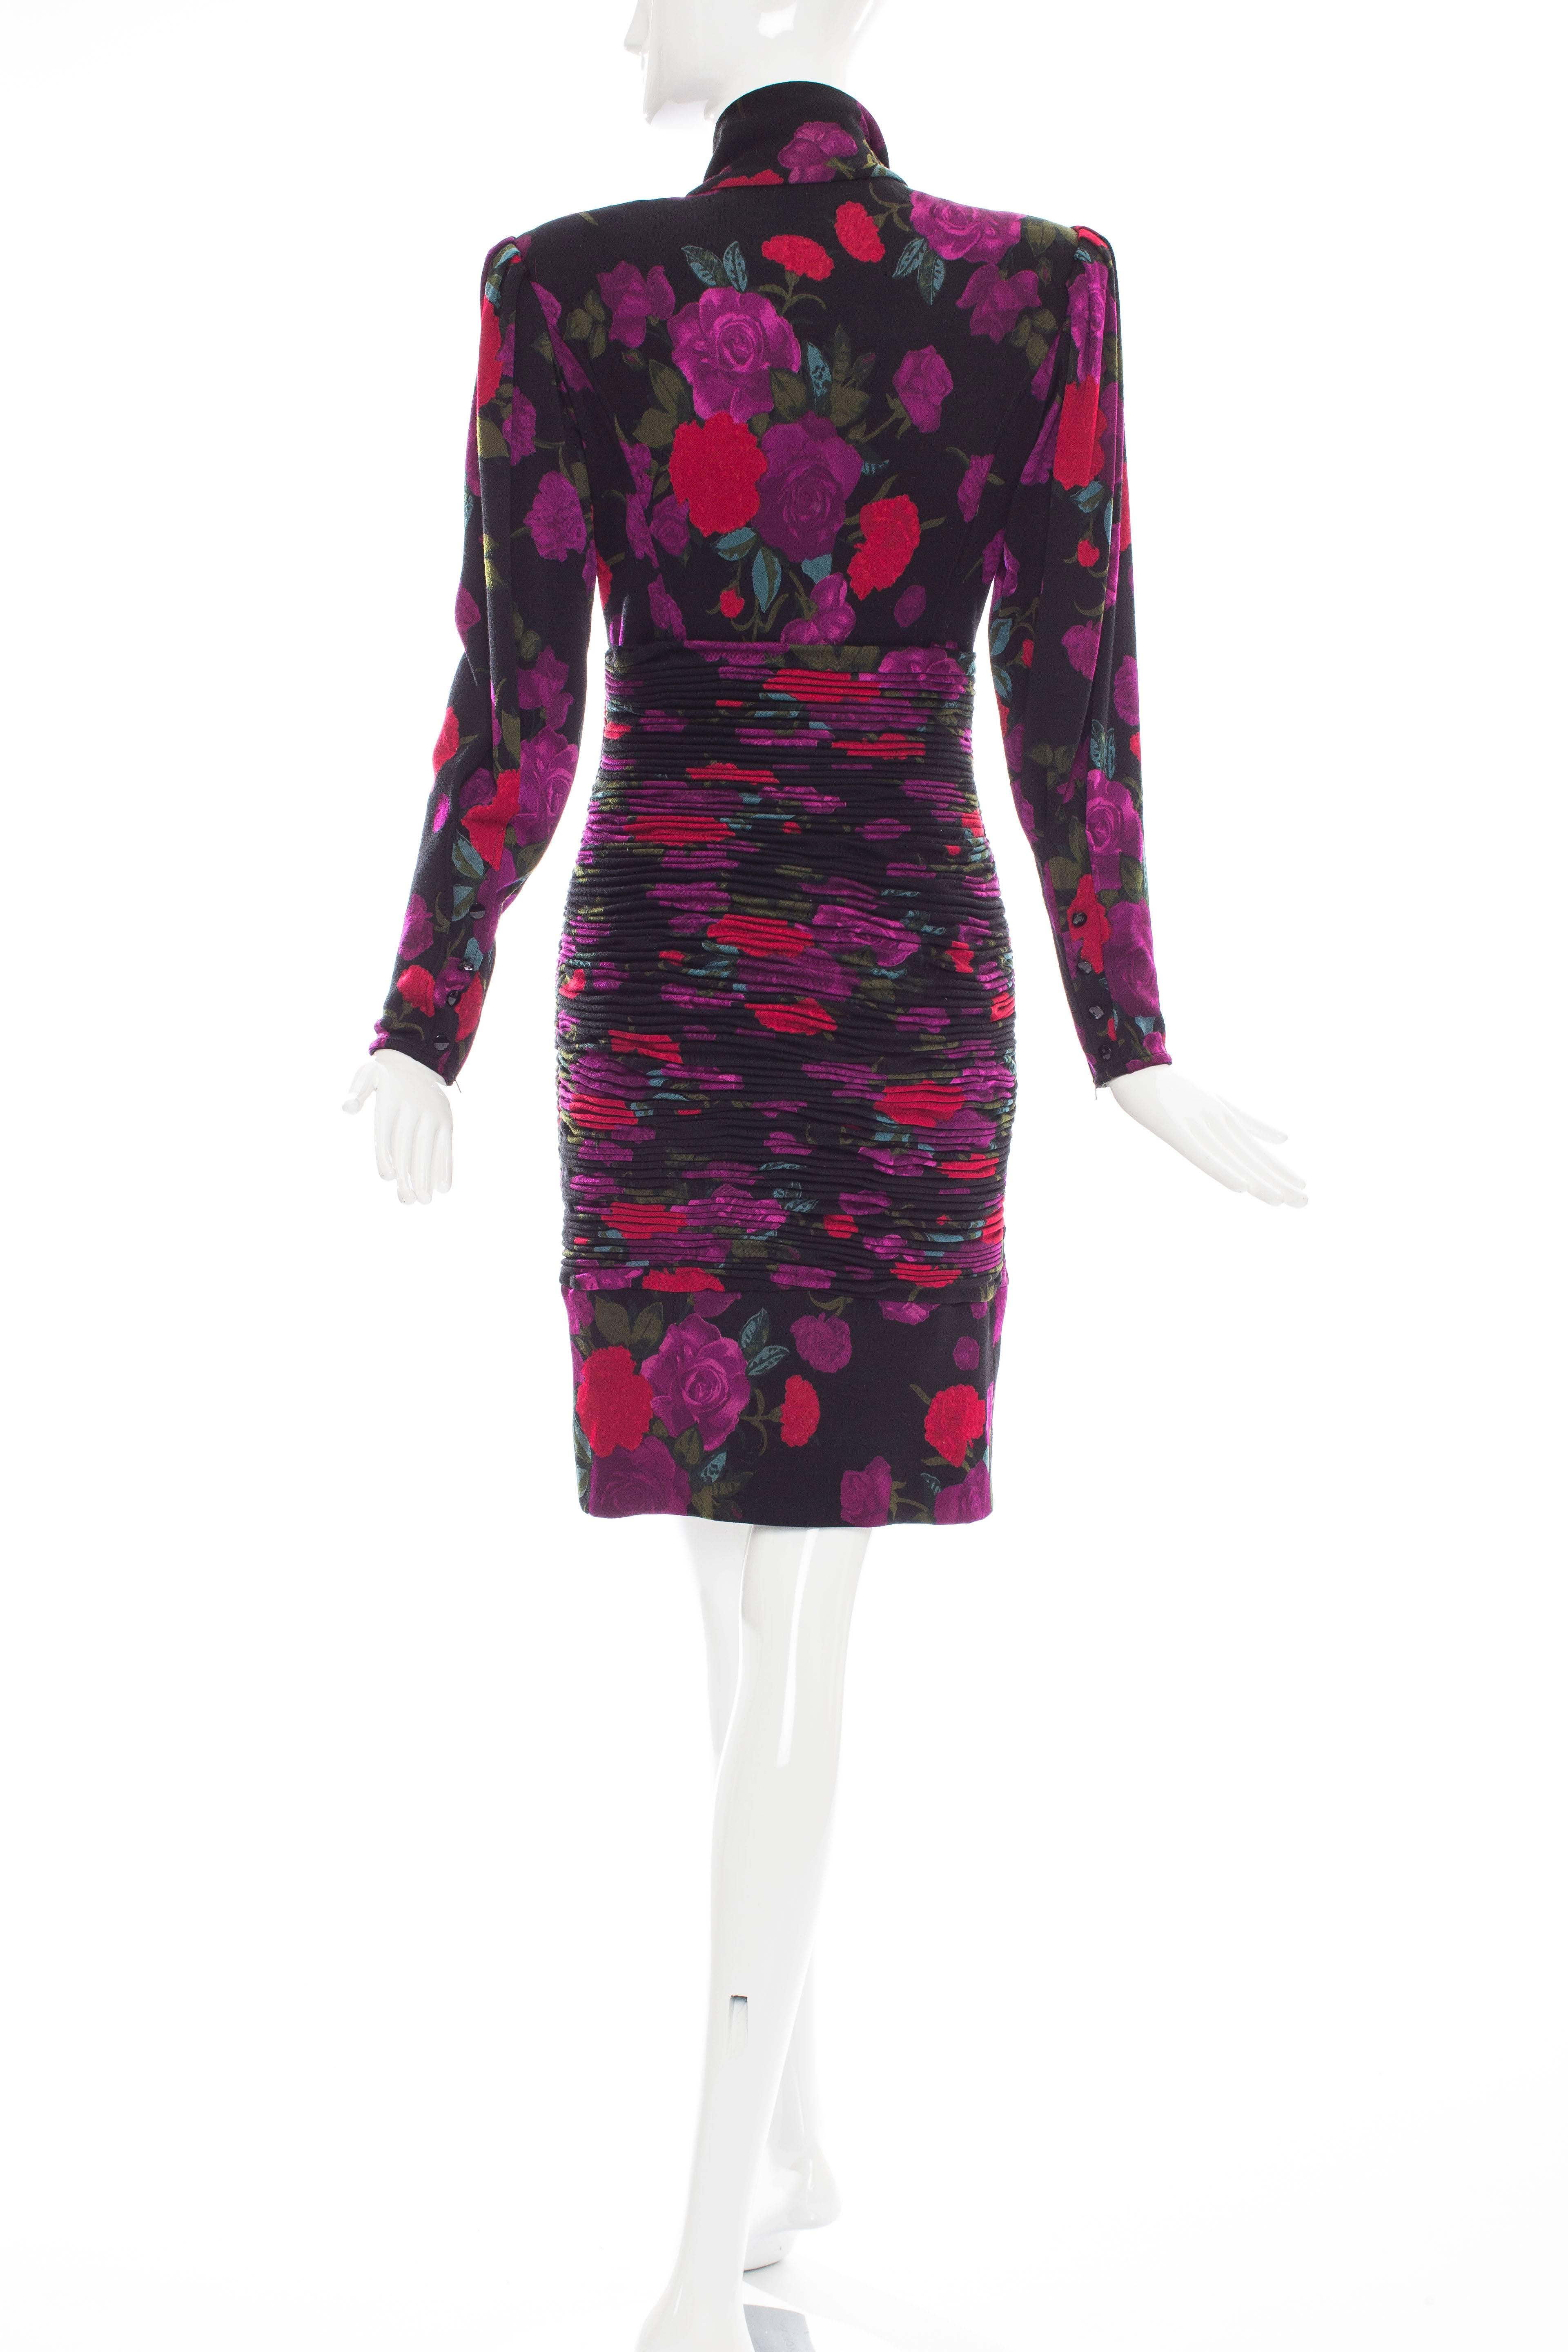 Emanuel Ungaro Floral Wool Jersey Ruched Dress, Circa 1980's In Excellent Condition For Sale In Cincinnati, OH